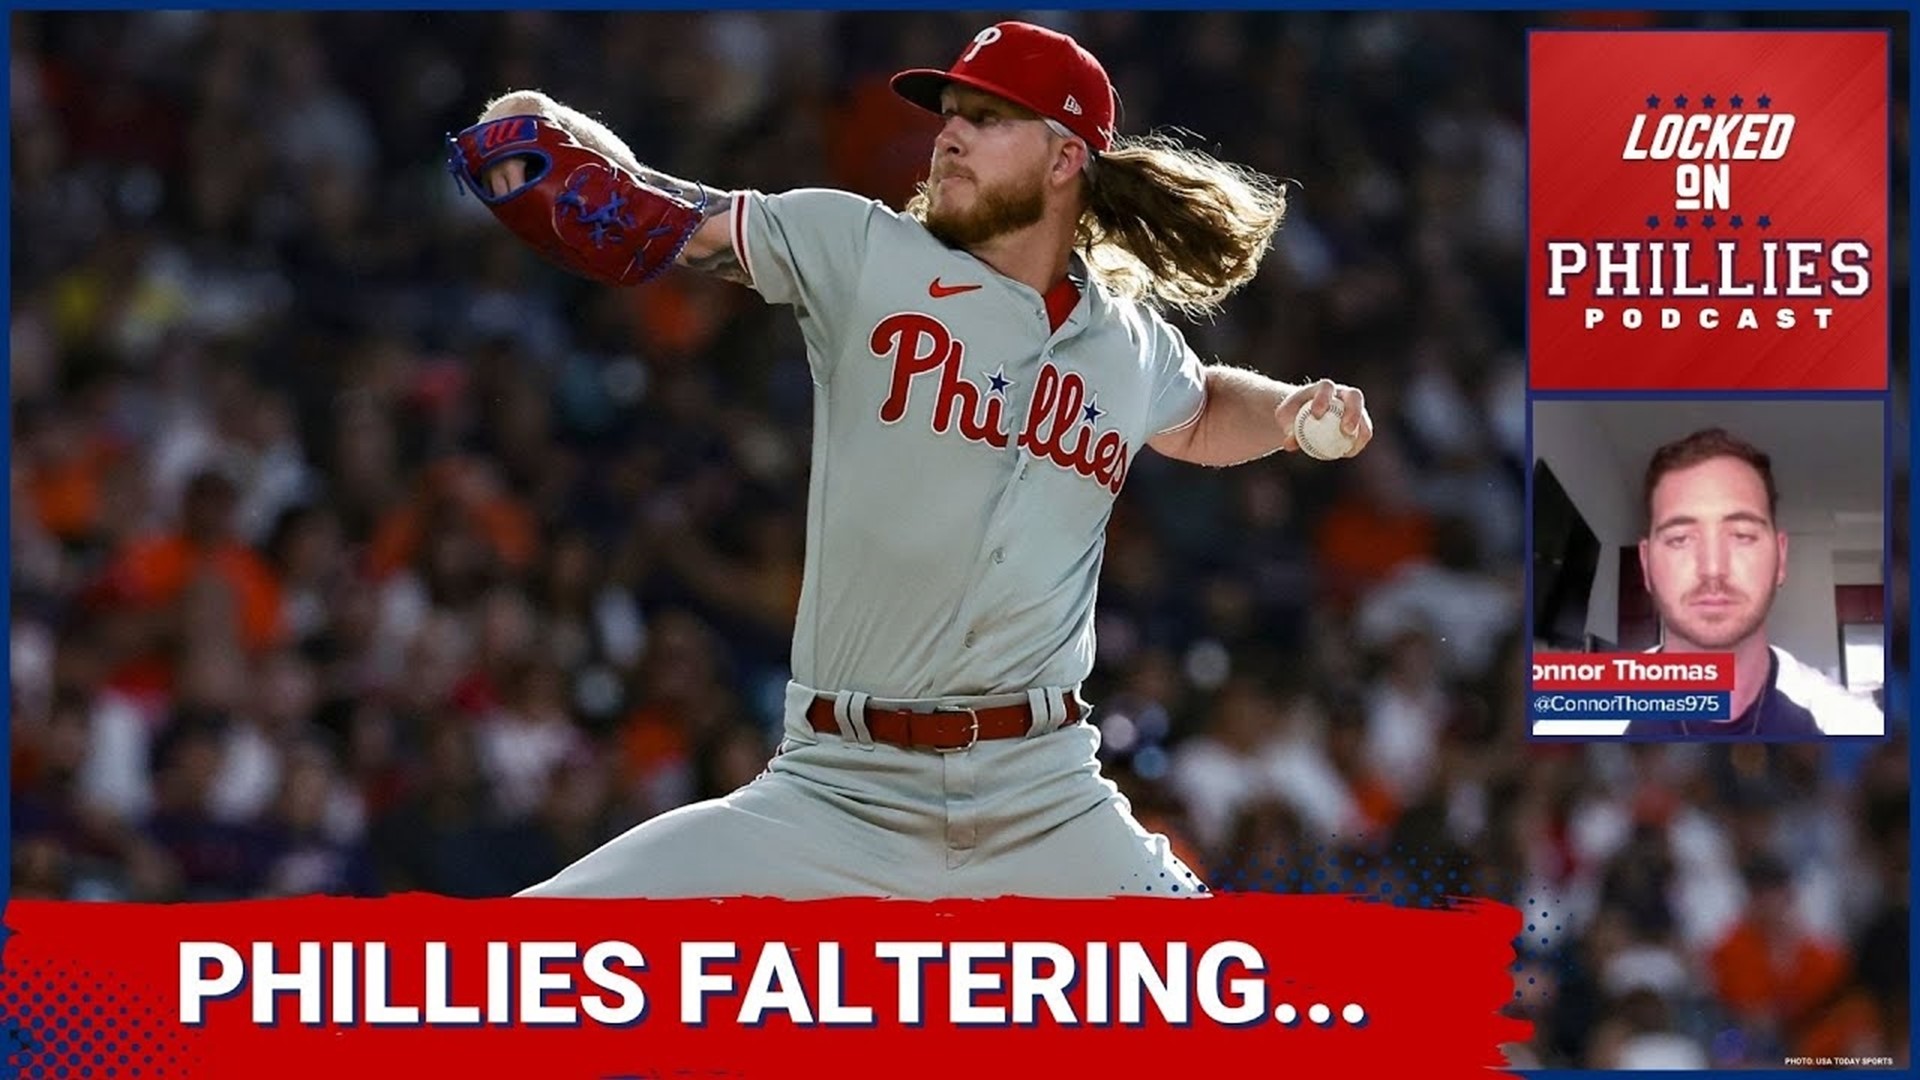 In today's episode, Connor discusses last night's Philadelphia Phillies' loss to the San Francisco Giants behind another rough start from Bailey Falter.